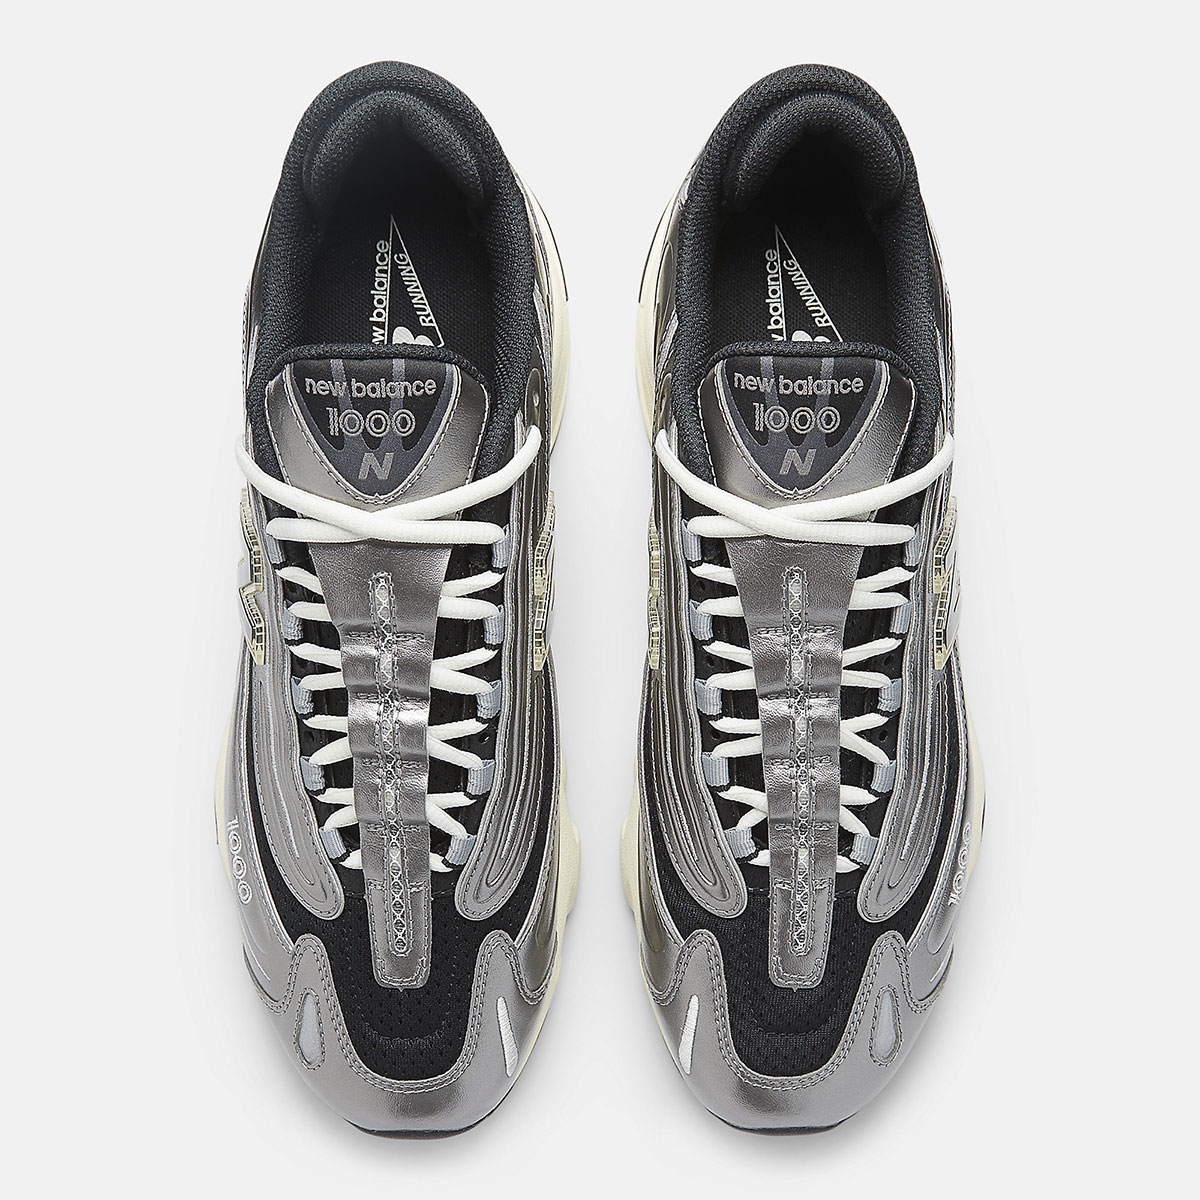 New Balance 1000sl Silver Release Date 2